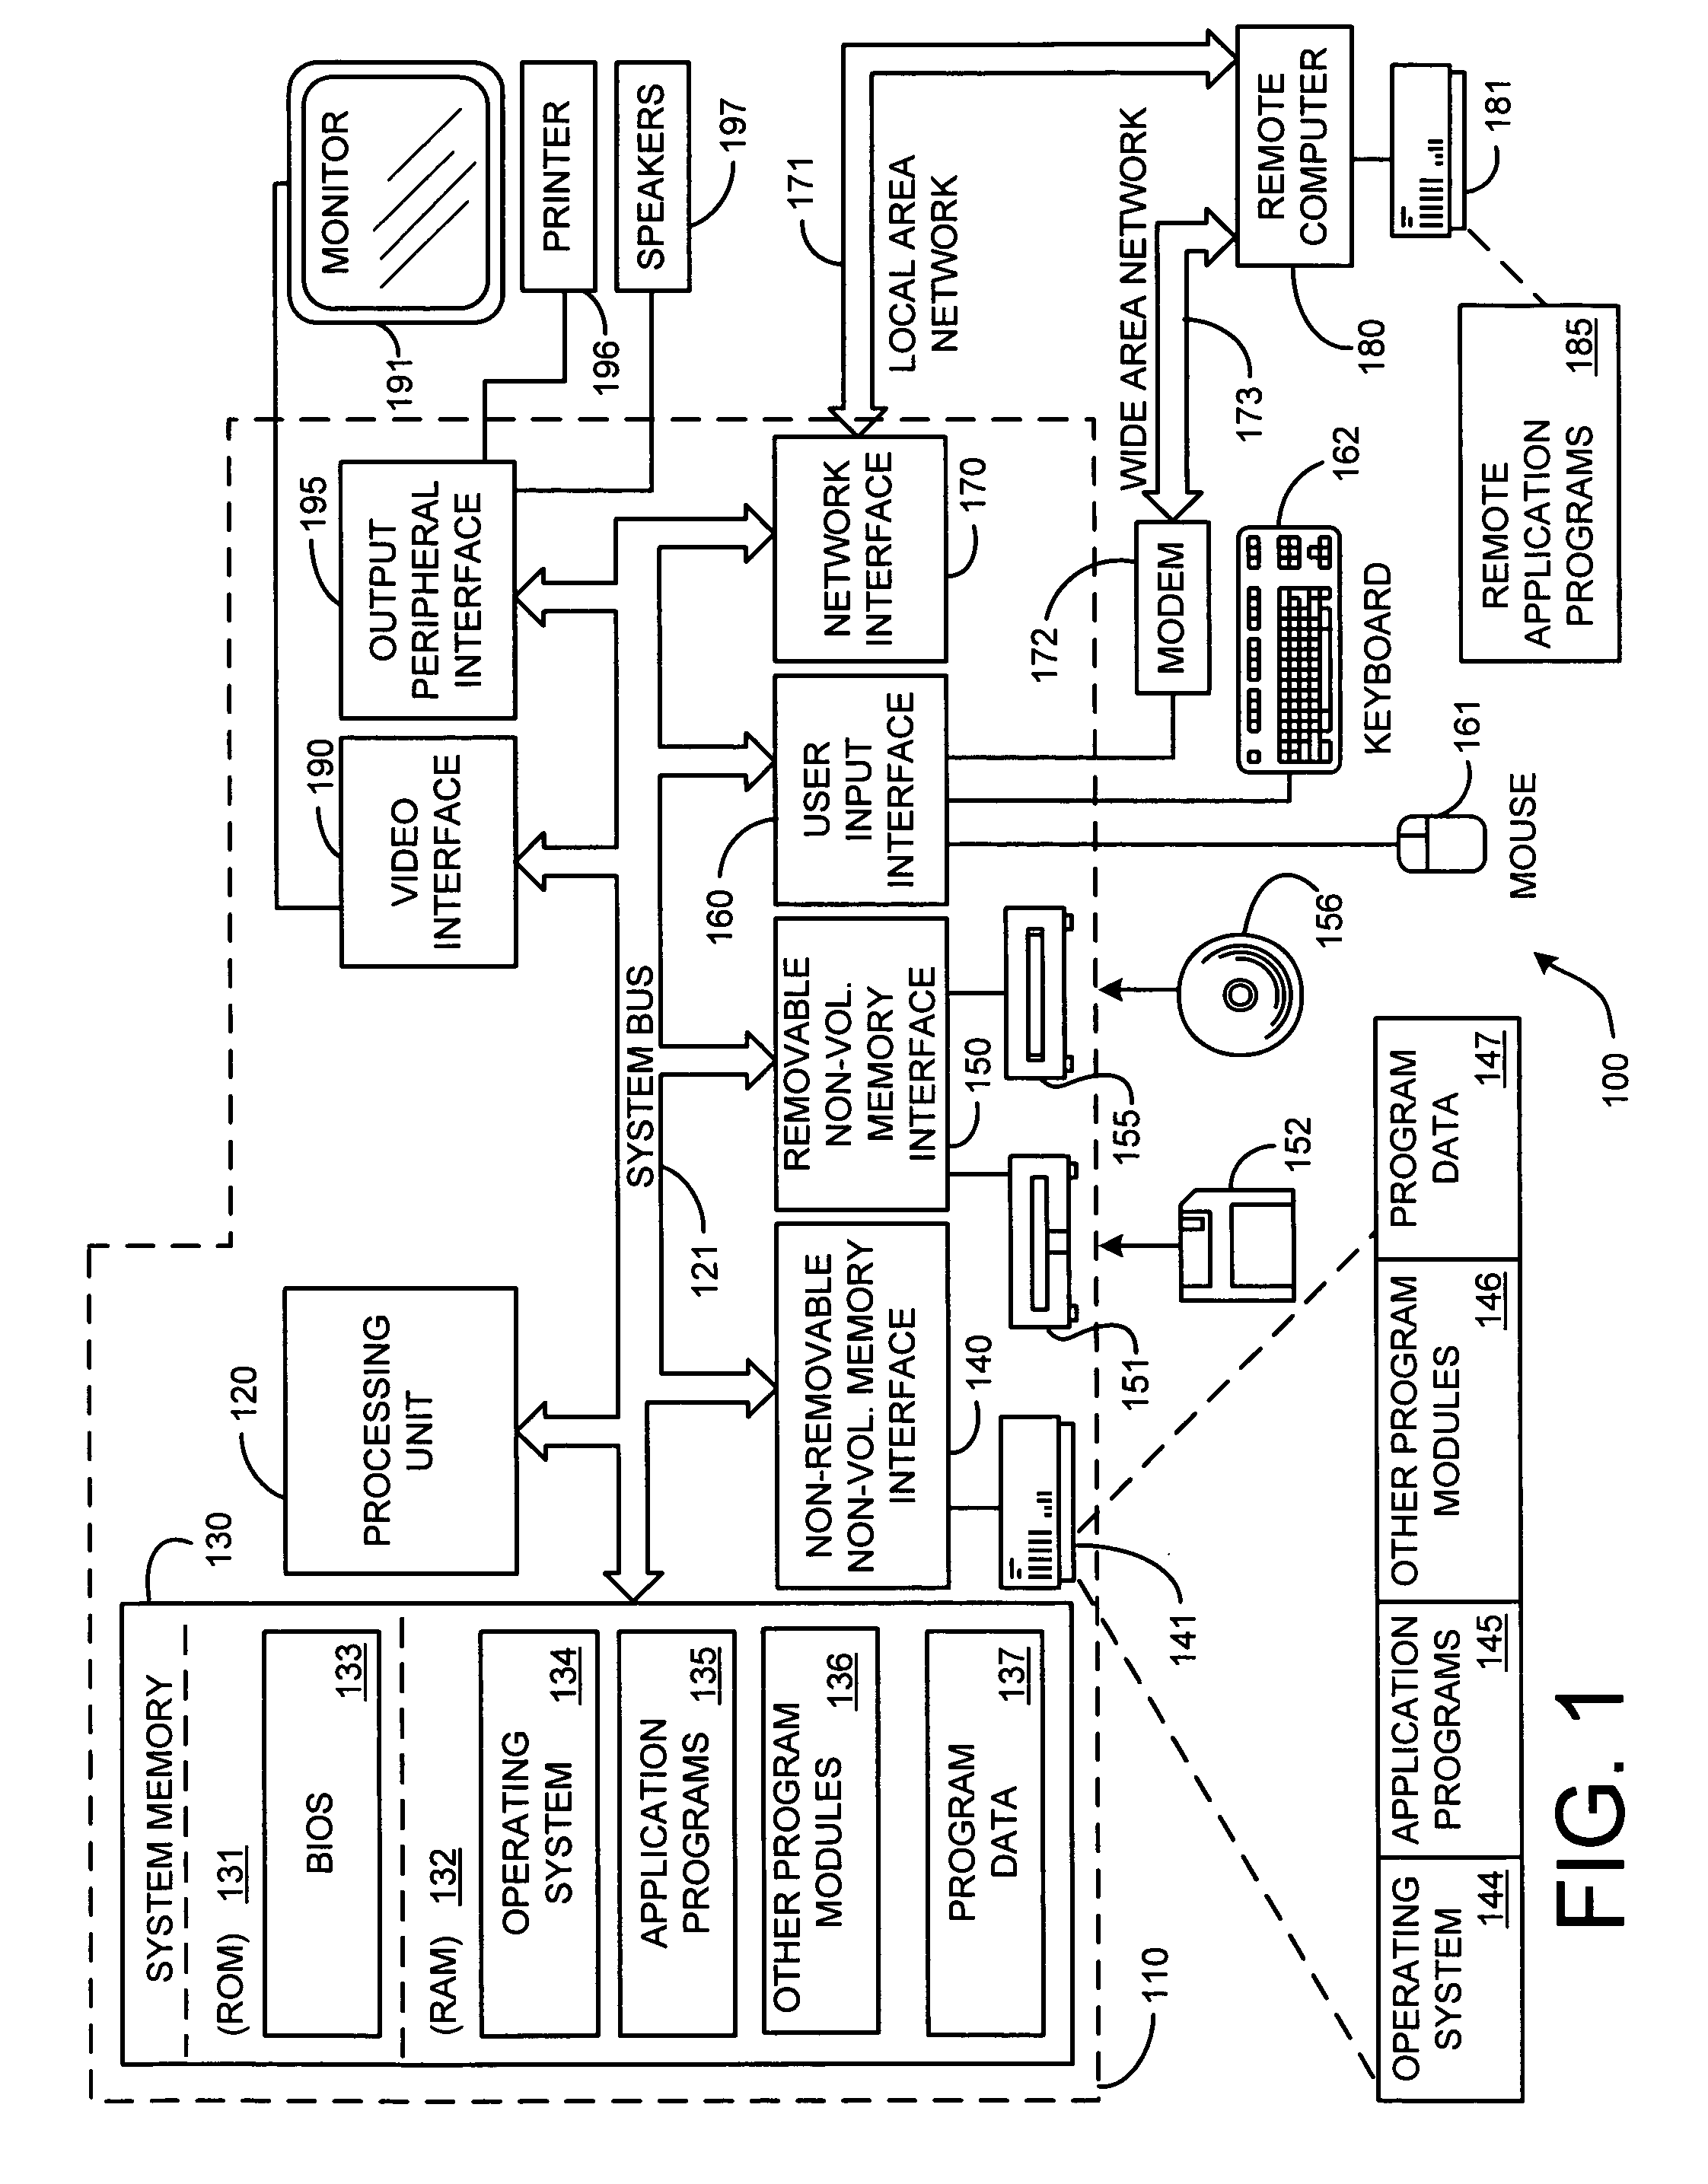 System and method for accelerating and optimizing the processing of machine learning techniques using a graphics processing unit